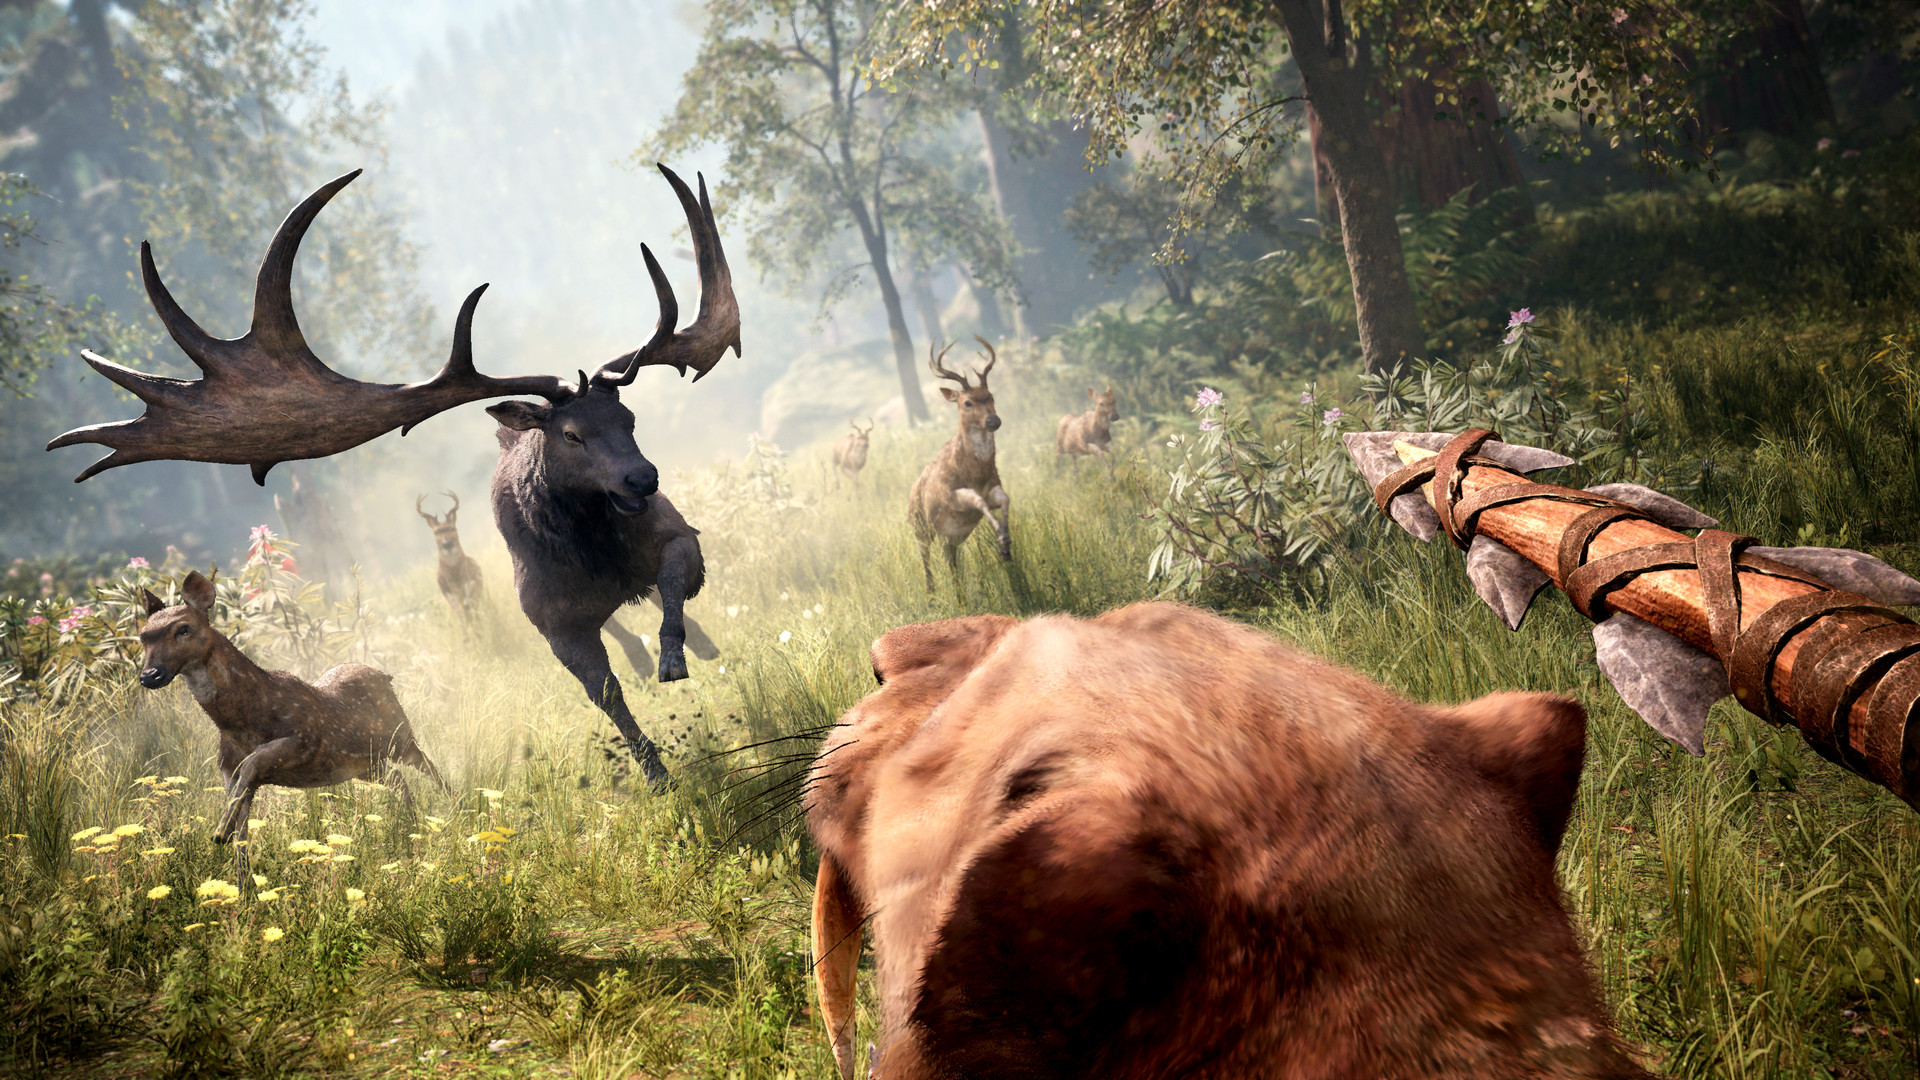 Save 75% on Far Cry® Primal on Steam